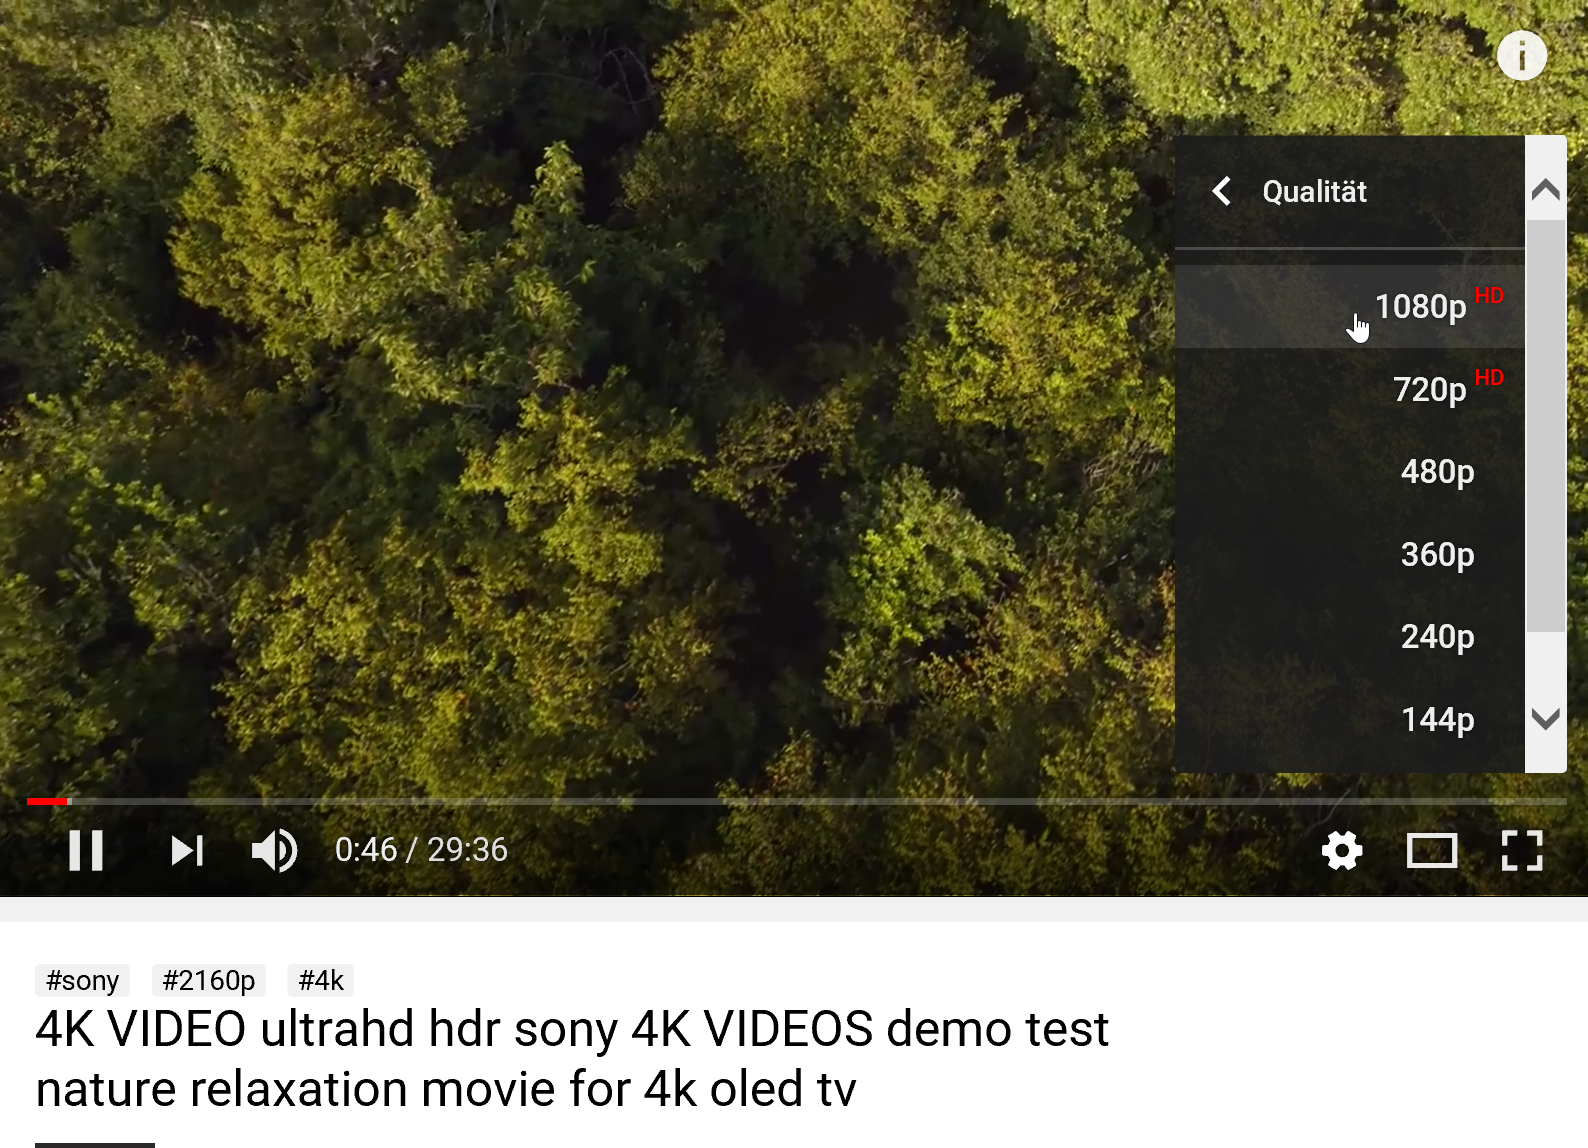 2018-10-17 19_33_17-(39) 4K VIDEO ultrahd hdr sony 4K VIDEOS demo test nature relaxation movie...png